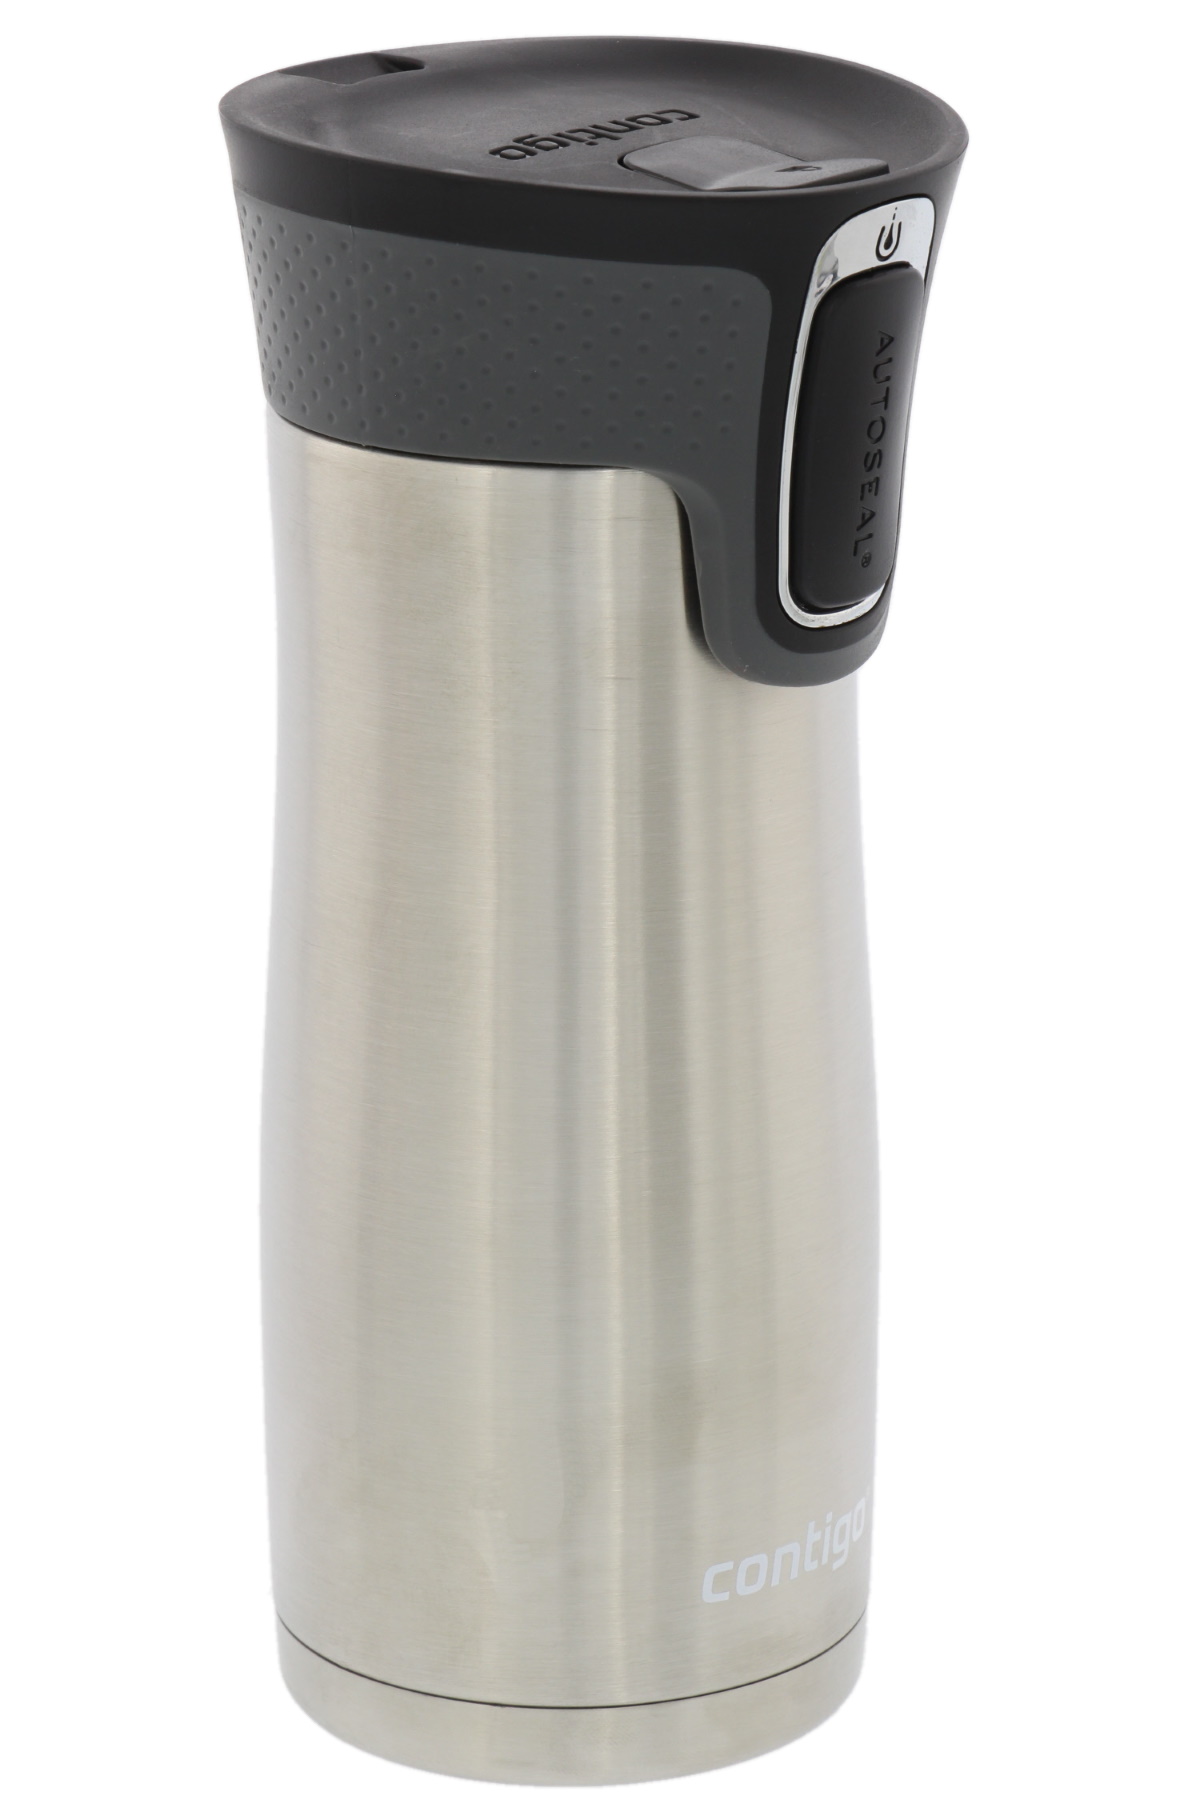 Contigo 16 Oz. Autoseal West Loop Vacuum-insulated Travel Mug with Easy Clean Lid, Stainless Steel - image 4 of 4